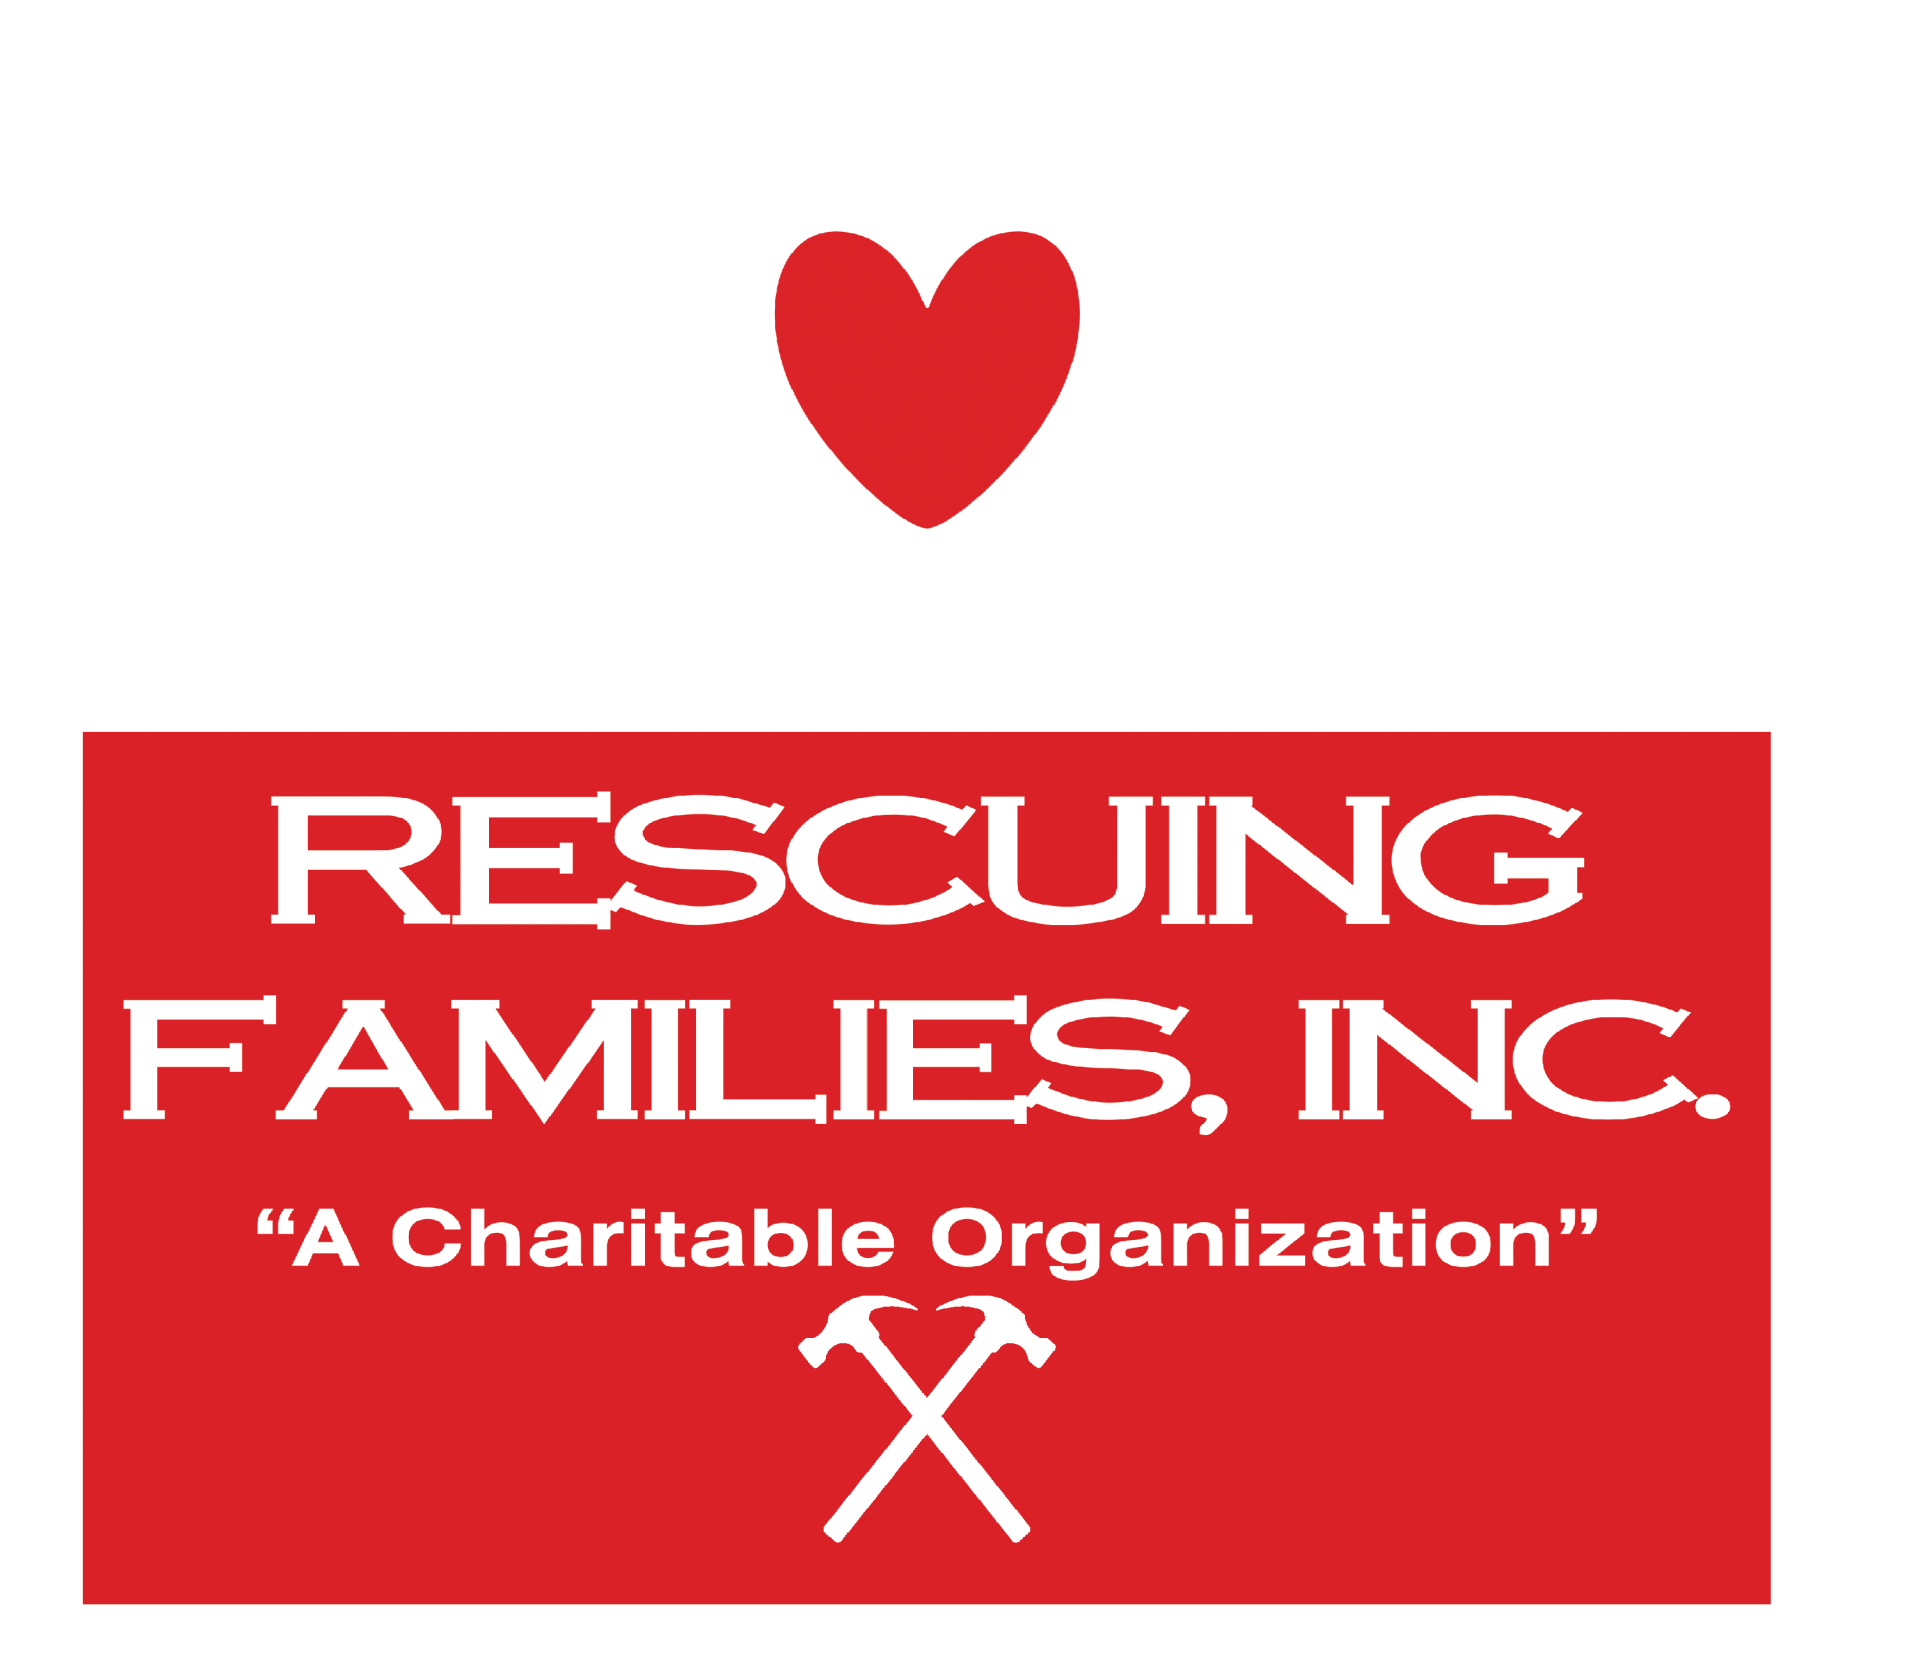 Rescuing Families - Restoring Hope for Families One Home at a Time